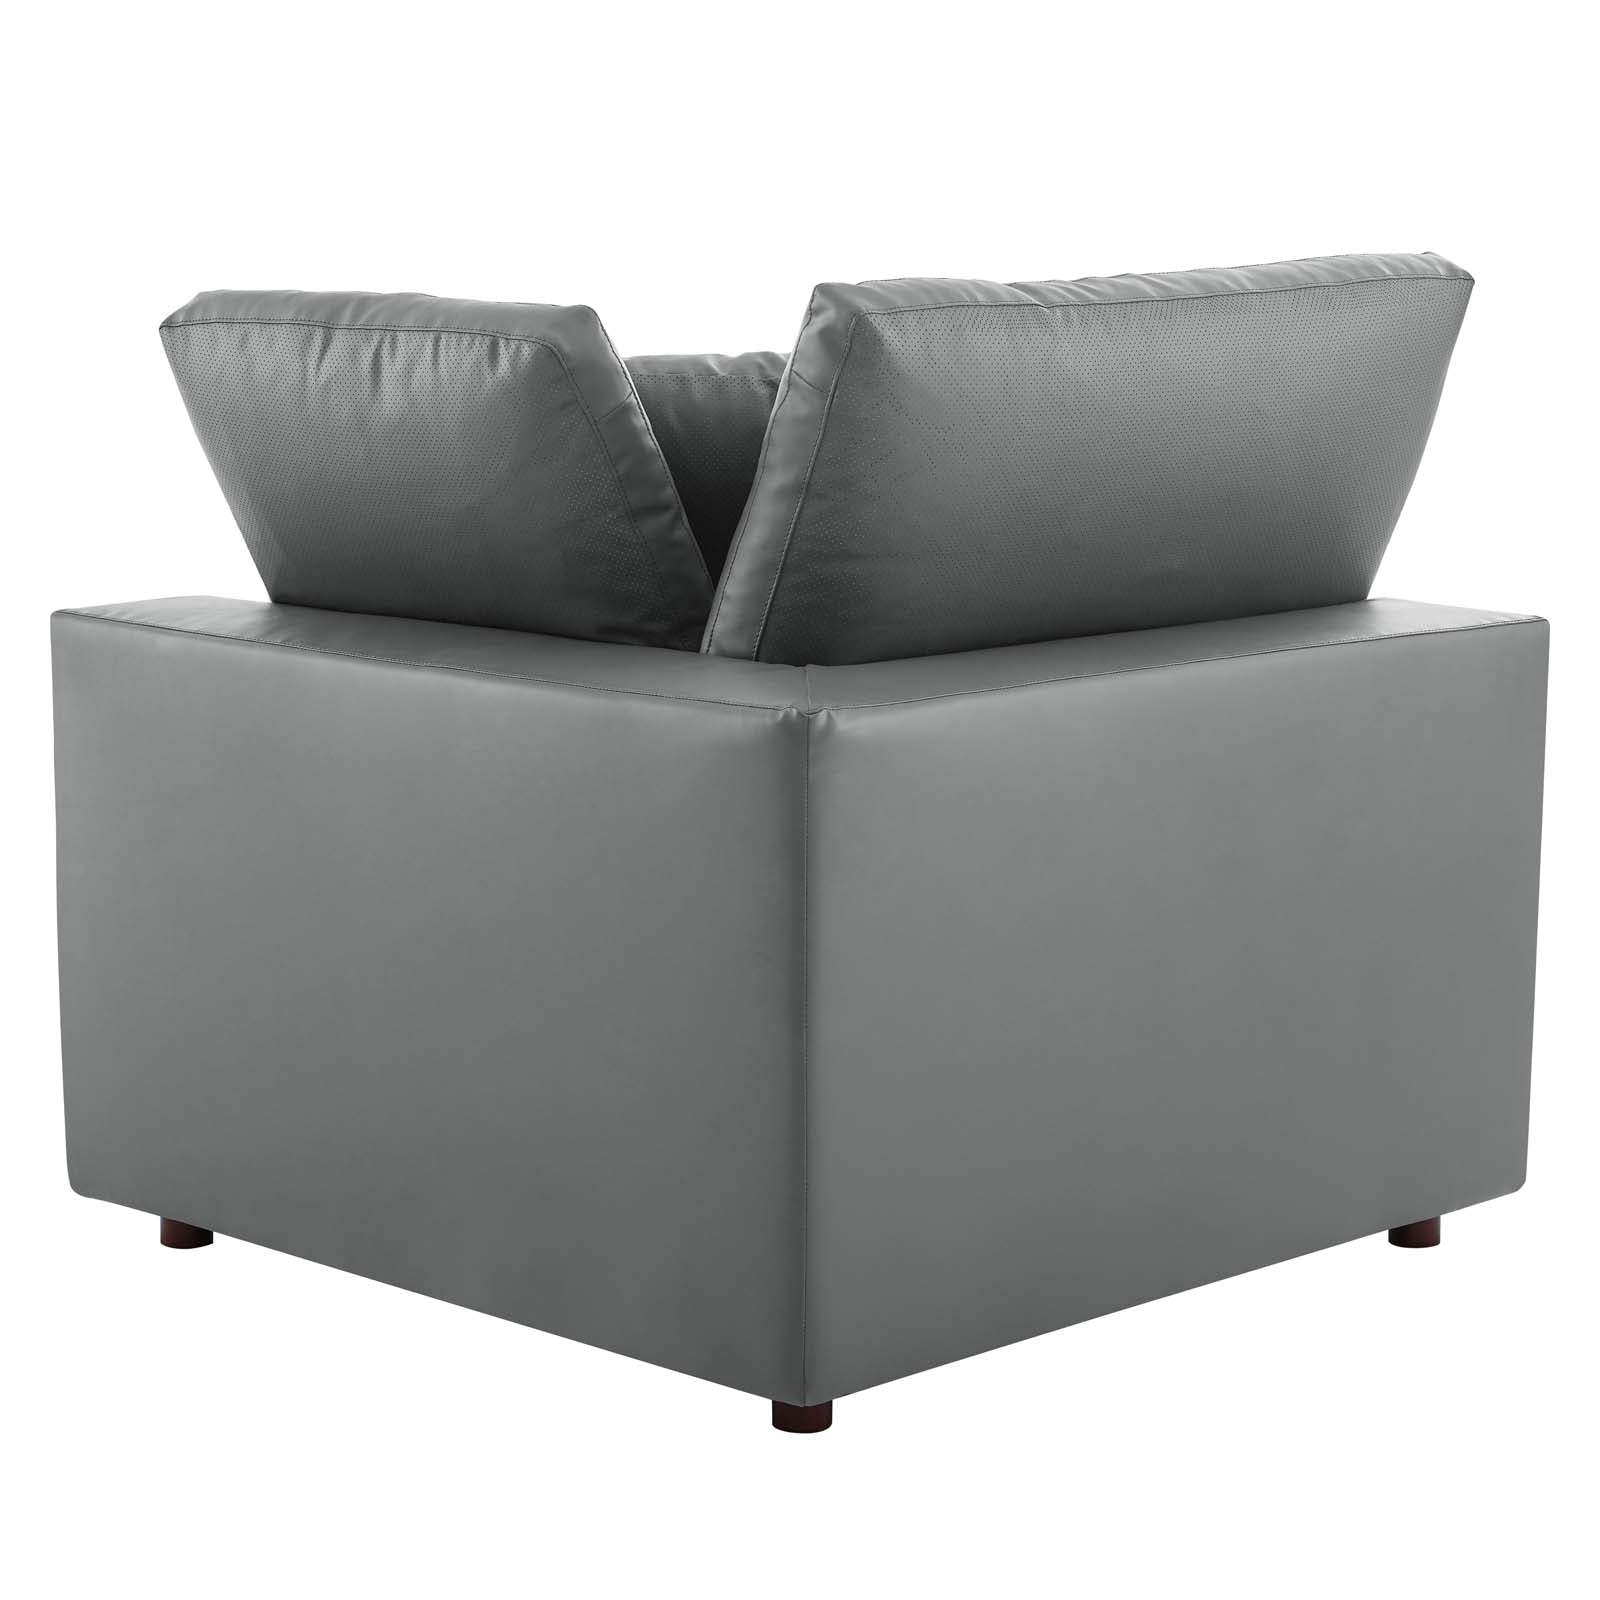 Modway Accent Chairs - Commix Down Filled Overstuffed Vegan Leather Corner Chair Gray